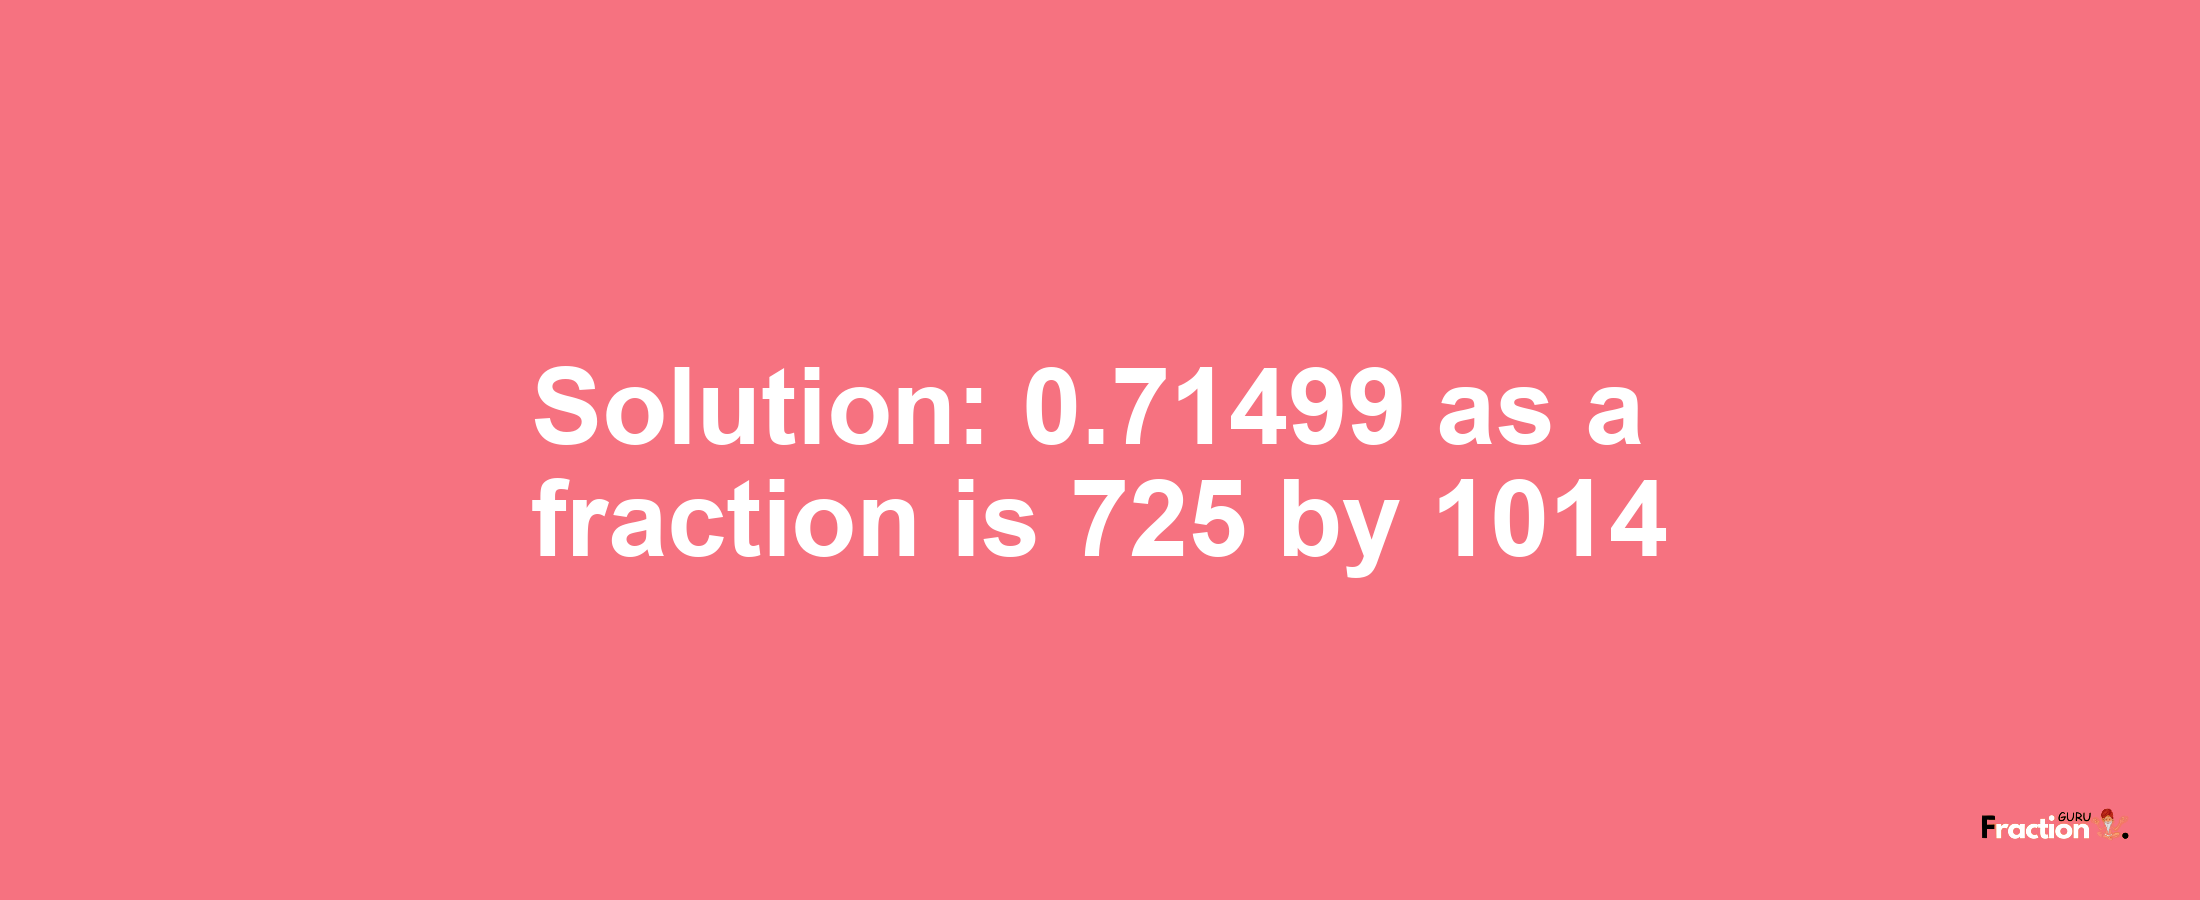 Solution:0.71499 as a fraction is 725/1014